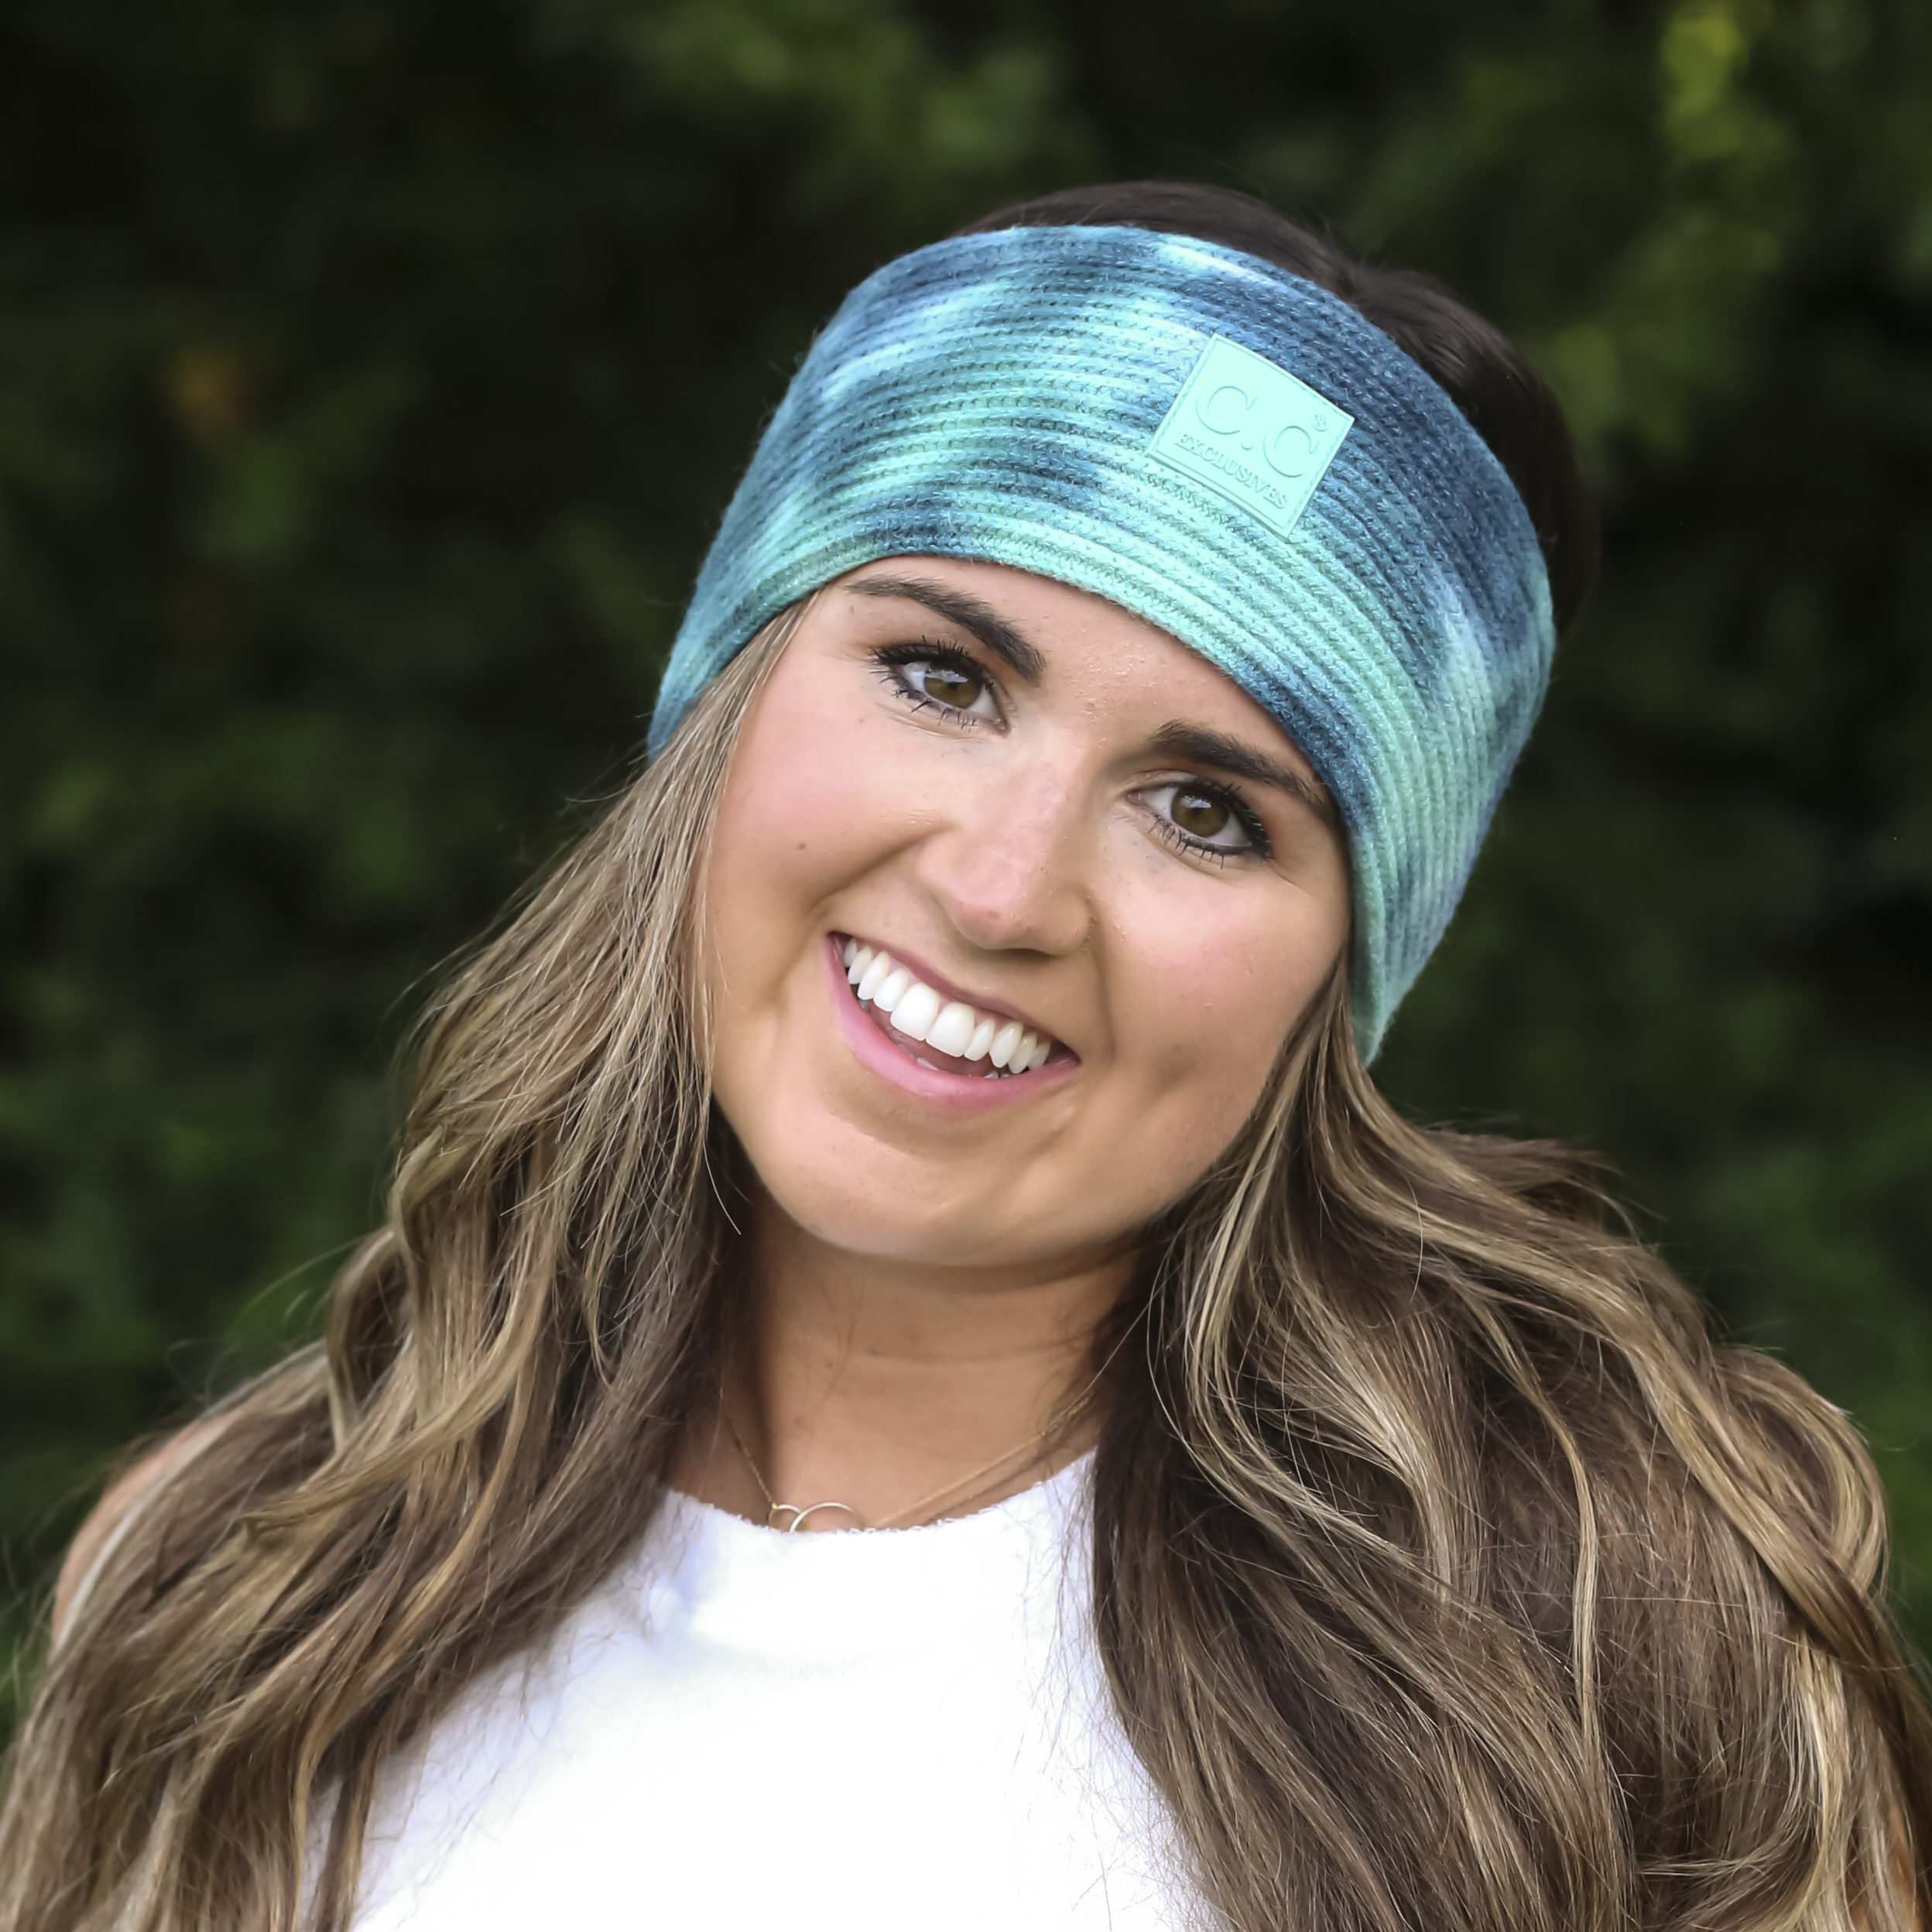 HW-7380 Tie Dye Headwrap with C.C Rubber Patch - Deep Teal/Sea Green